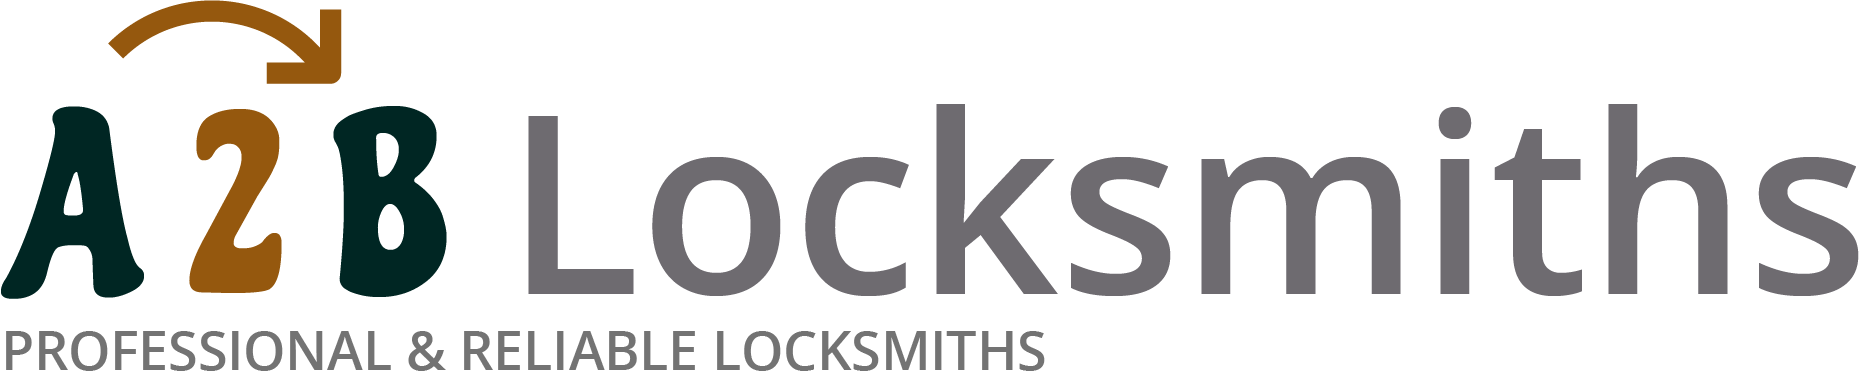 If you are locked out of house in Ledbury, our 24/7 local emergency locksmith services can help you.